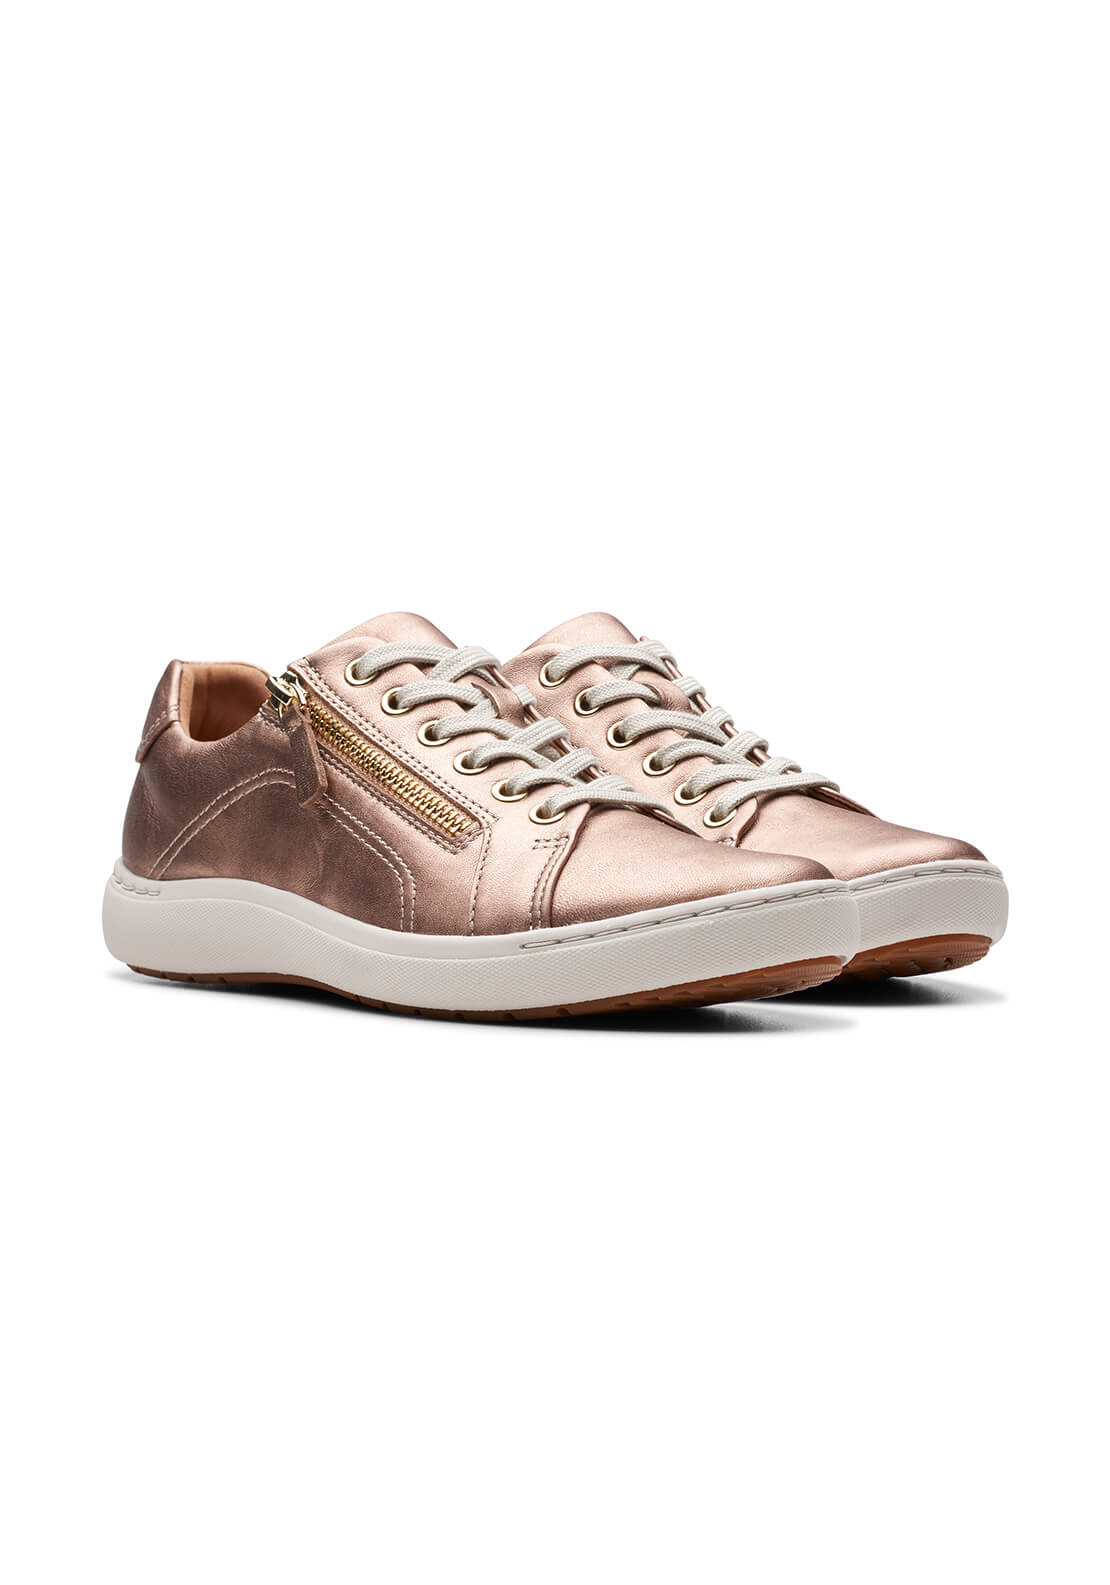 Clarks Nalle Lace Zip Trainer - Rose Gold 1 Shaws Department Stores